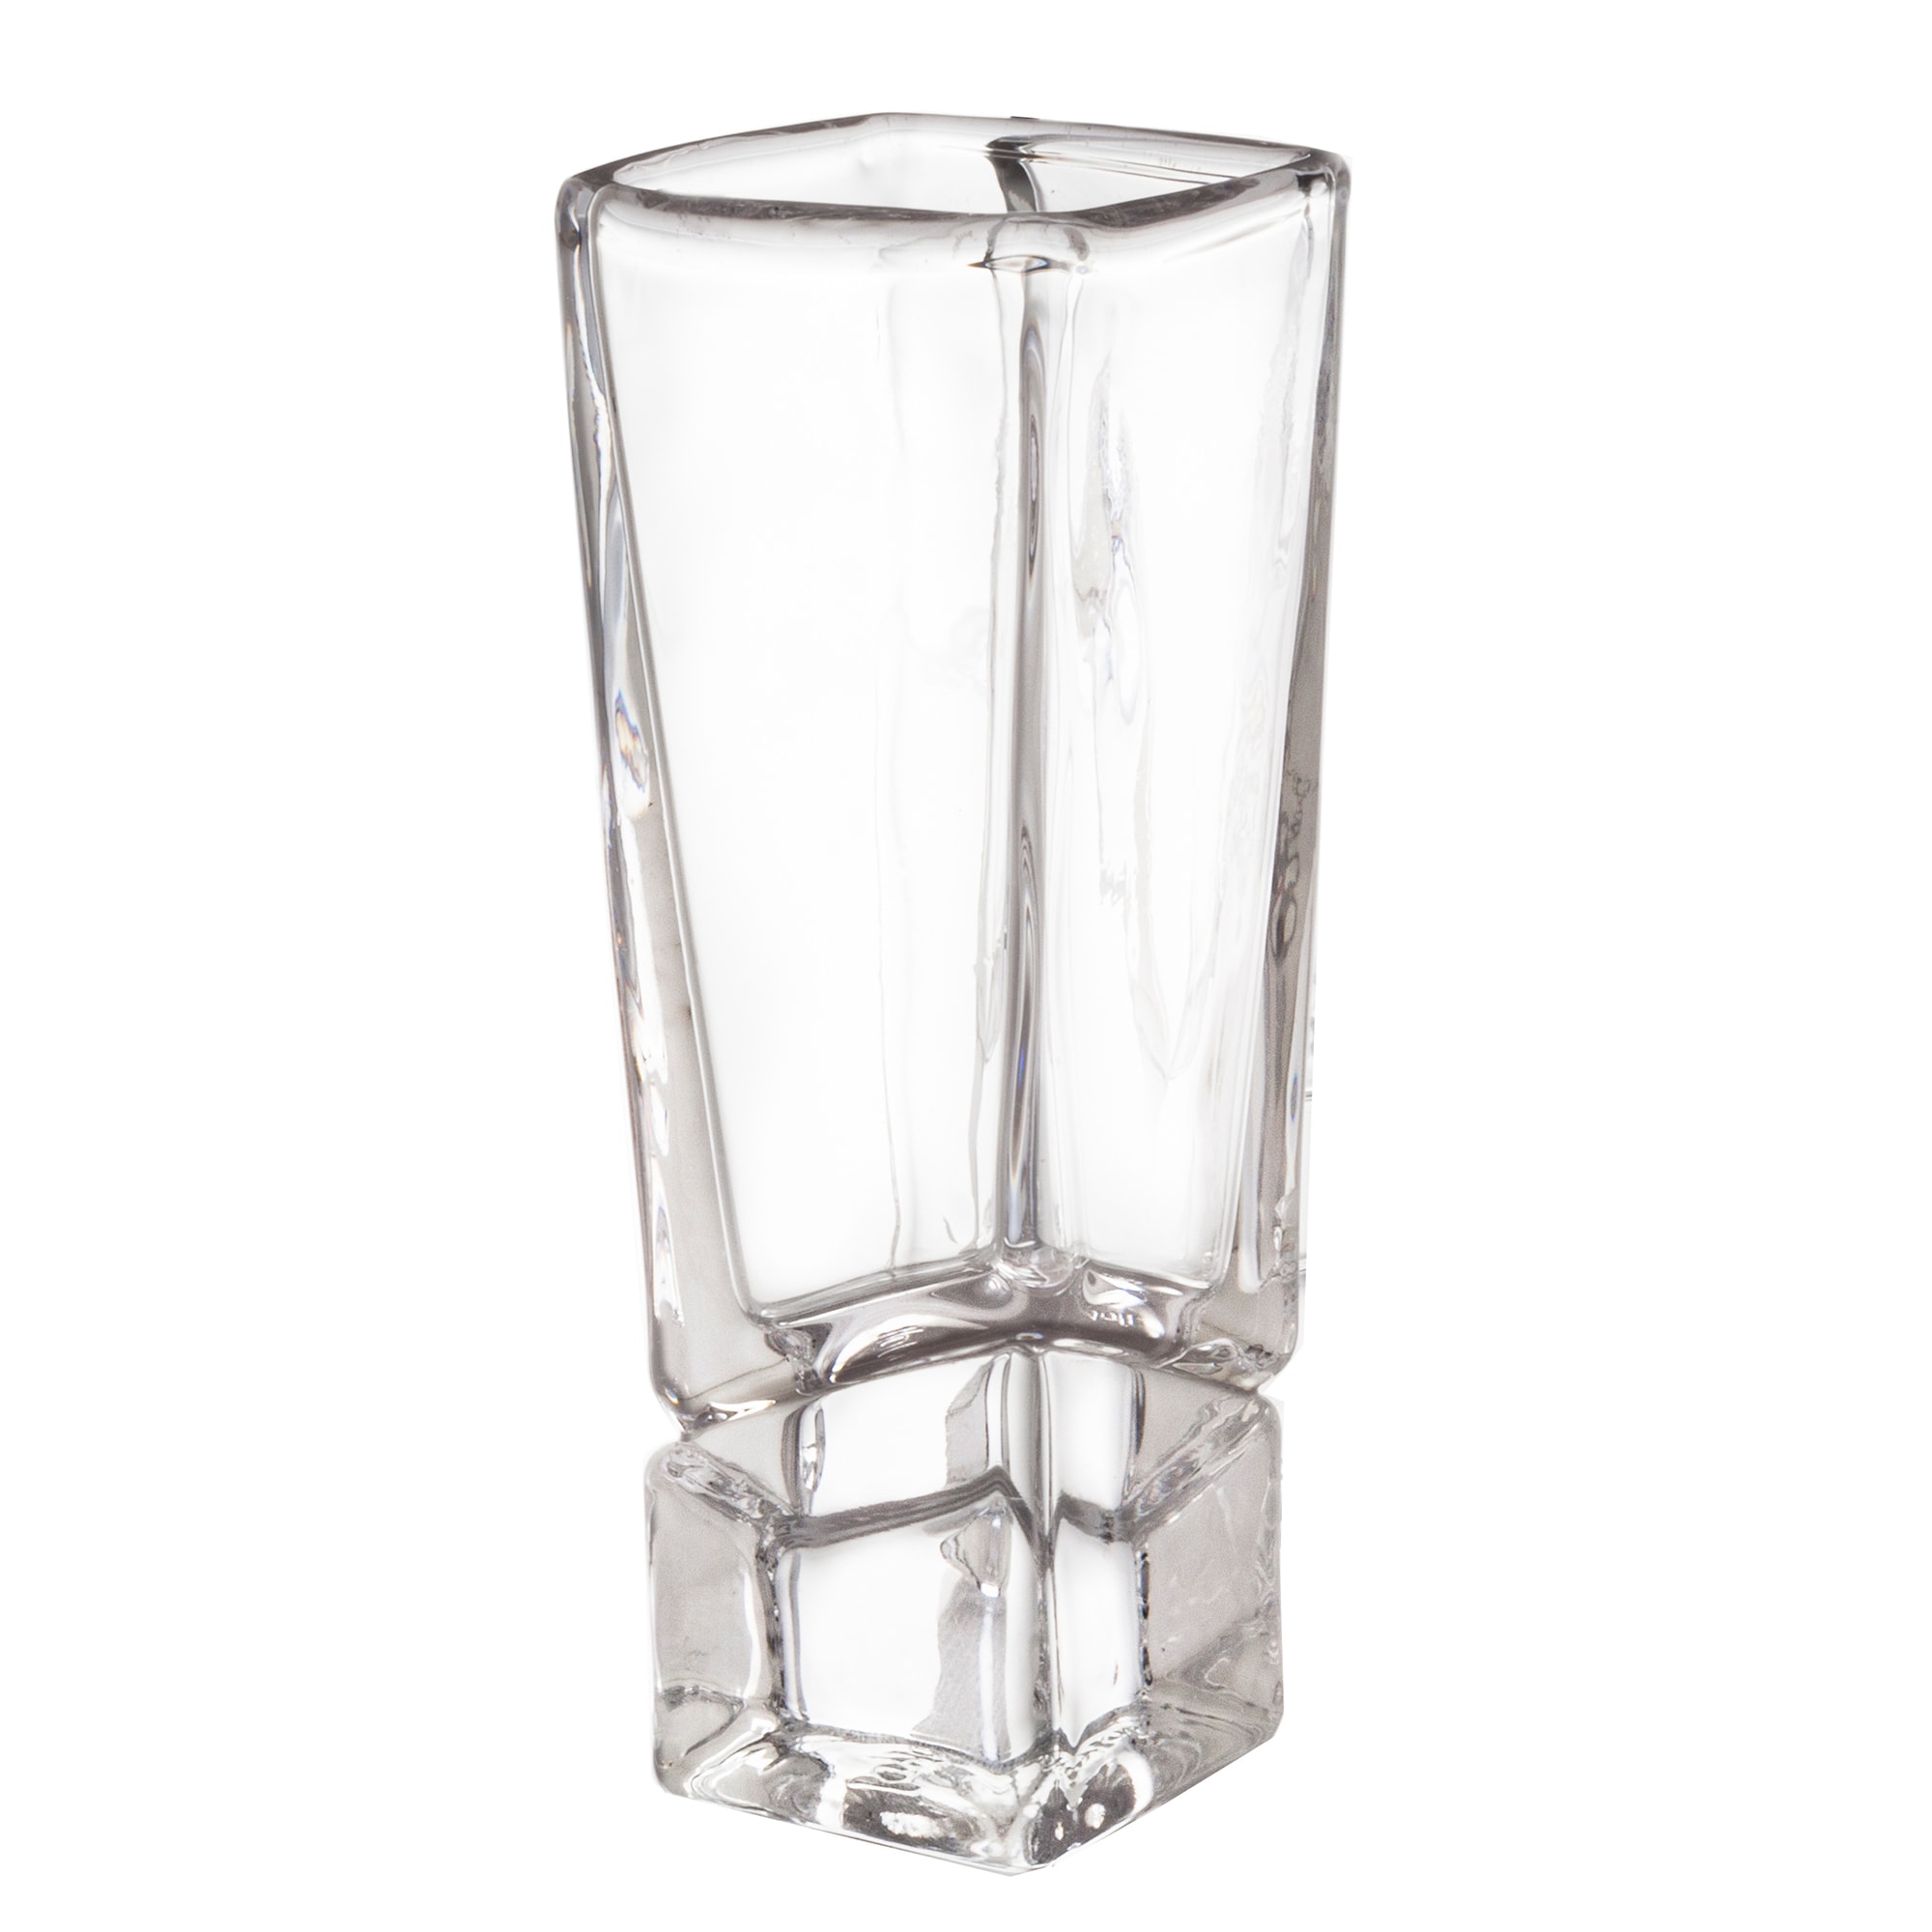 Wholesale Carre Square Heavy Base Whiskey Glasses, Drinking